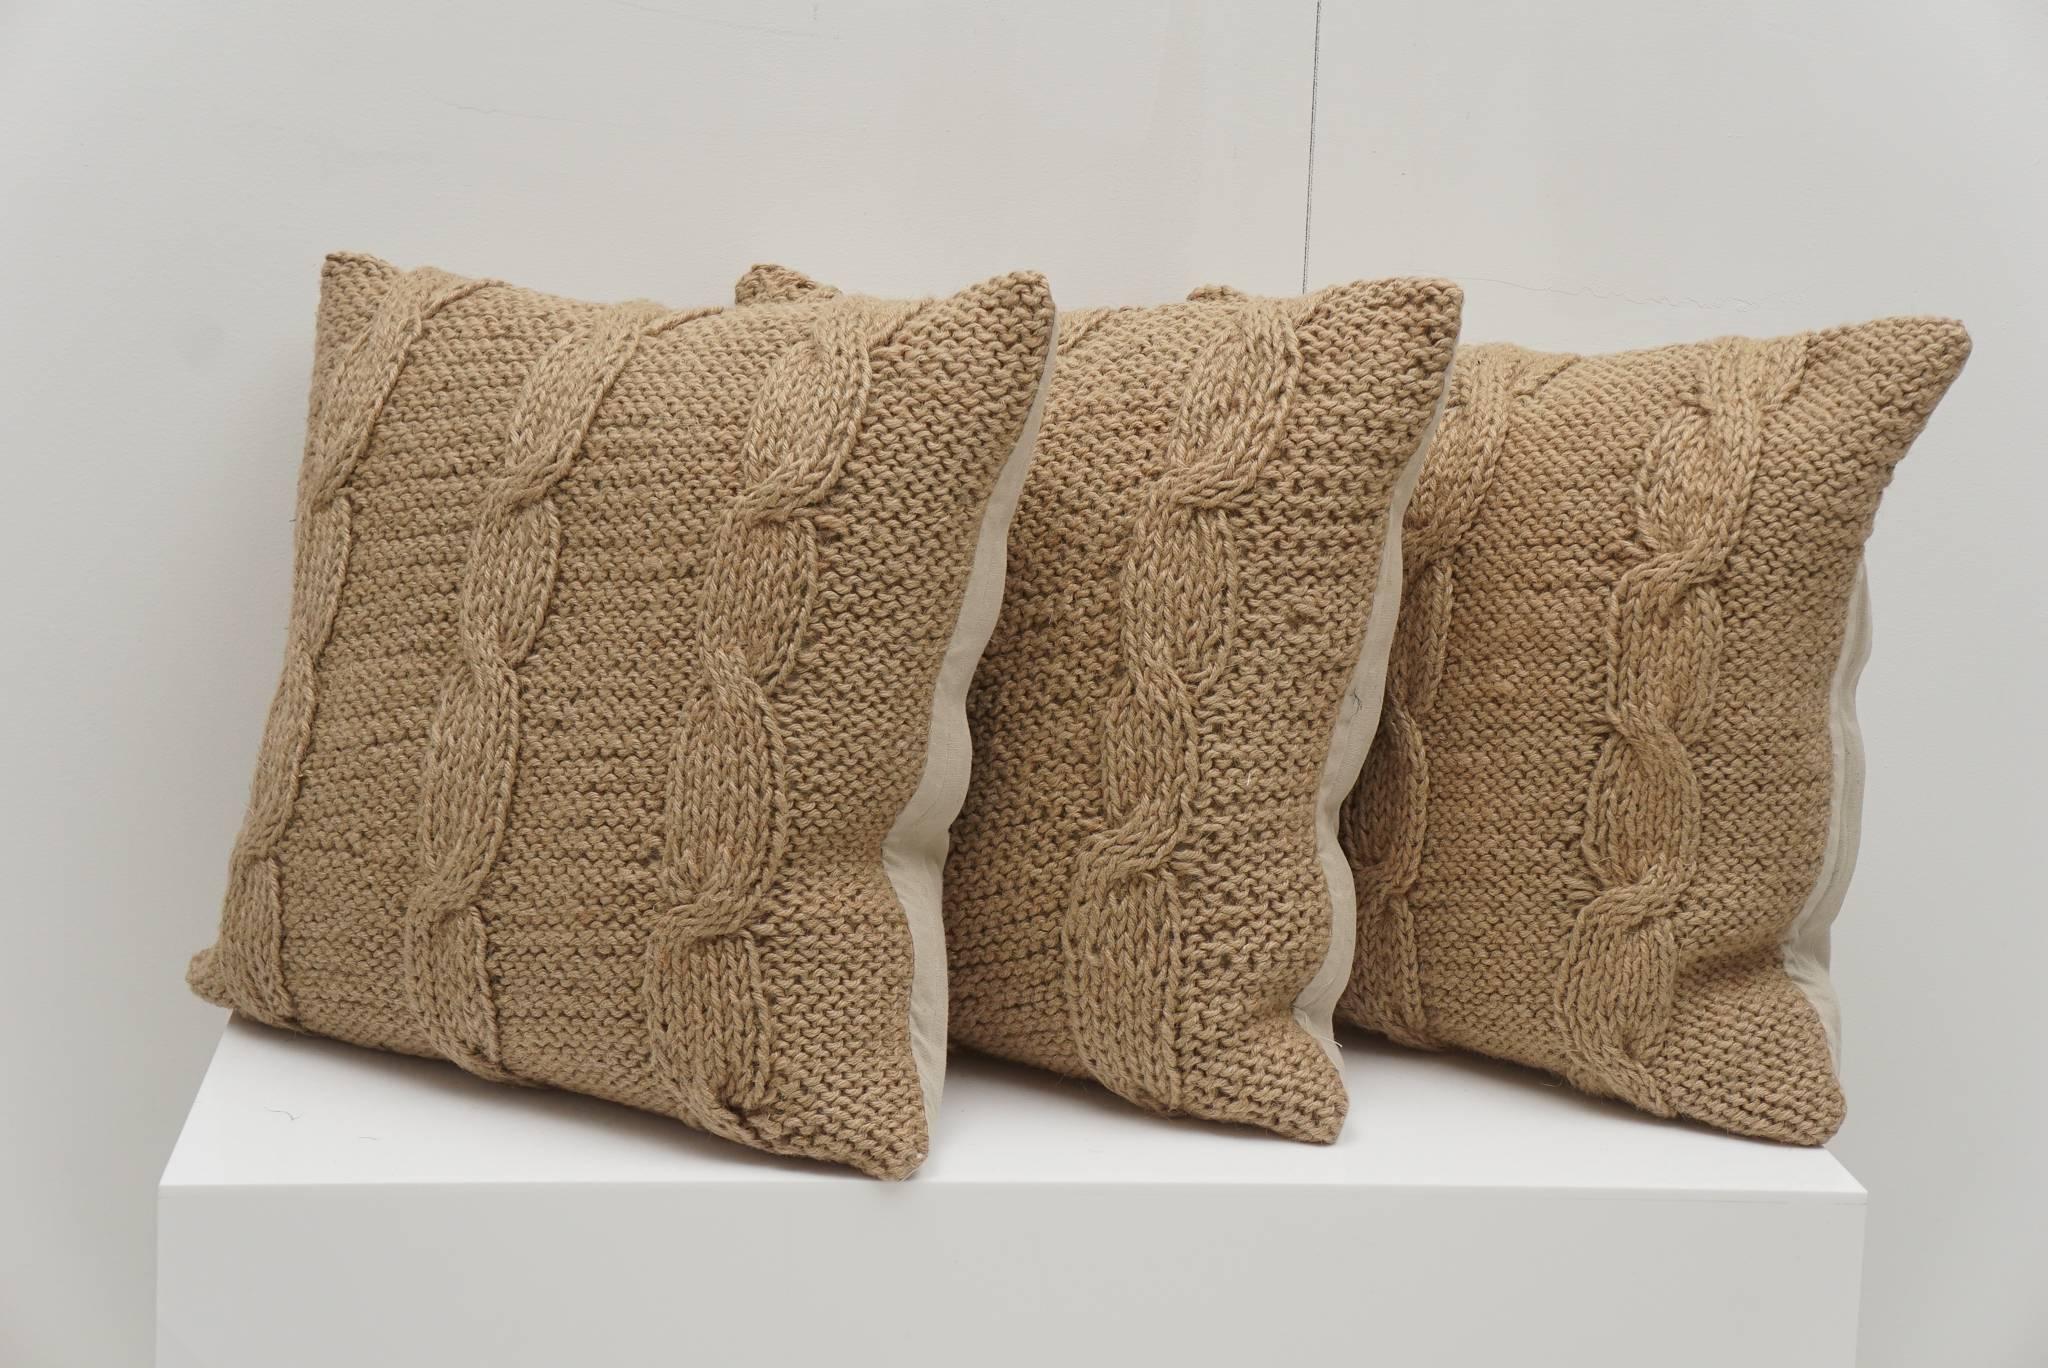 Brown hemp fabric cable knit design provides a timeless beauty to these pillows. Cotton backs with 50/50 down fill. Set of three pillows $275.00